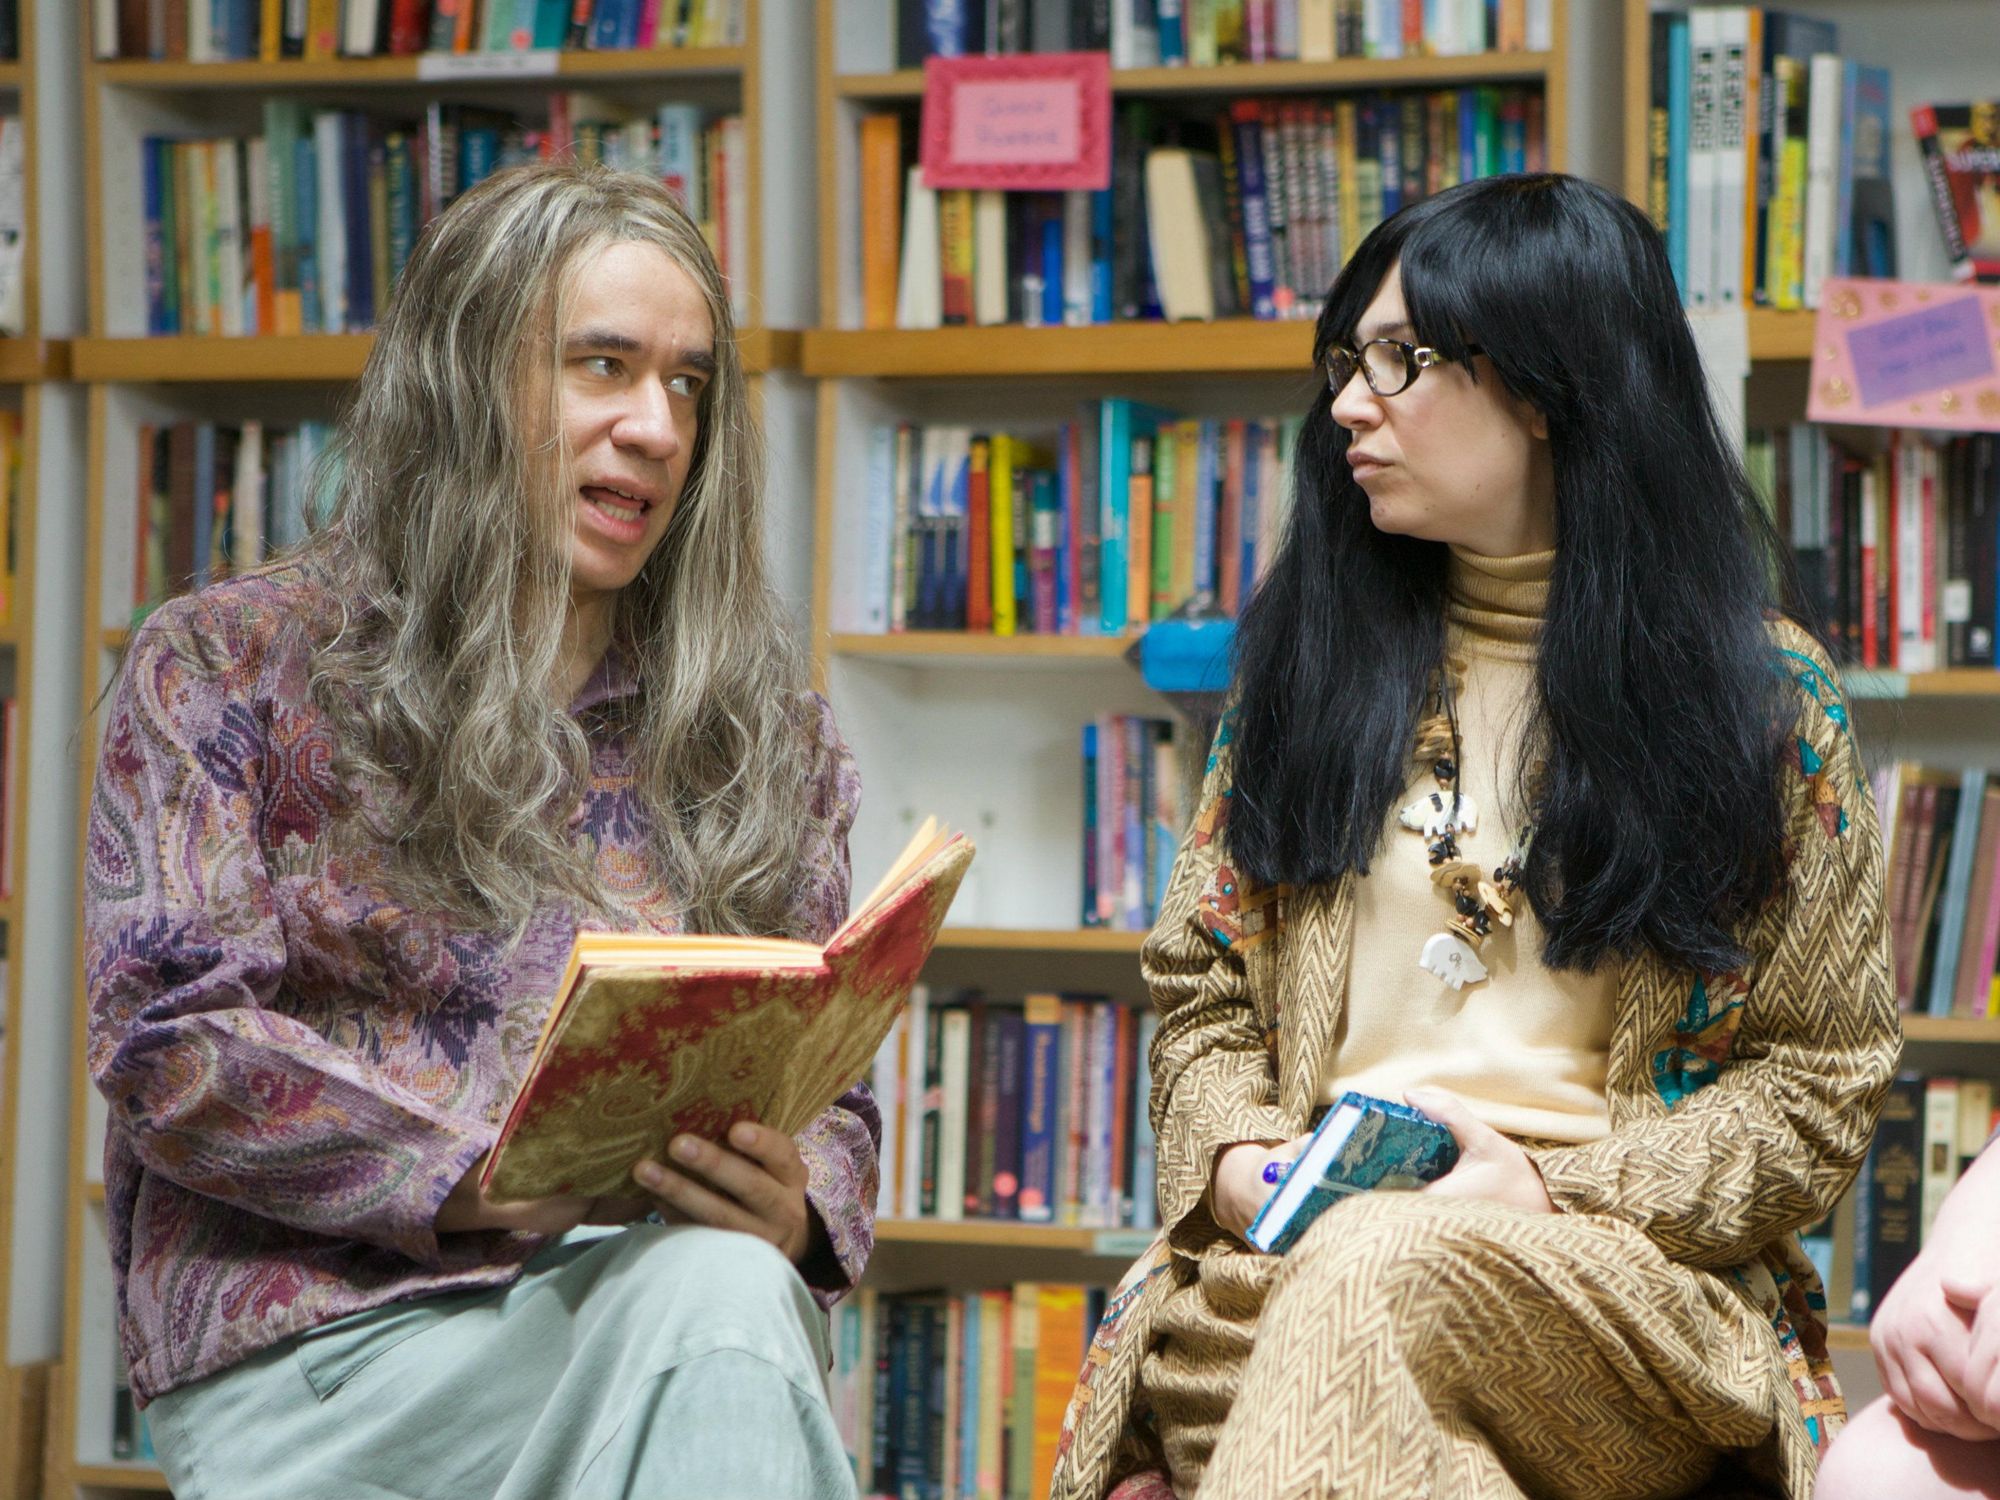 Fred Armisen and Carrie Brownstein as the bookstore owners in Portlandia